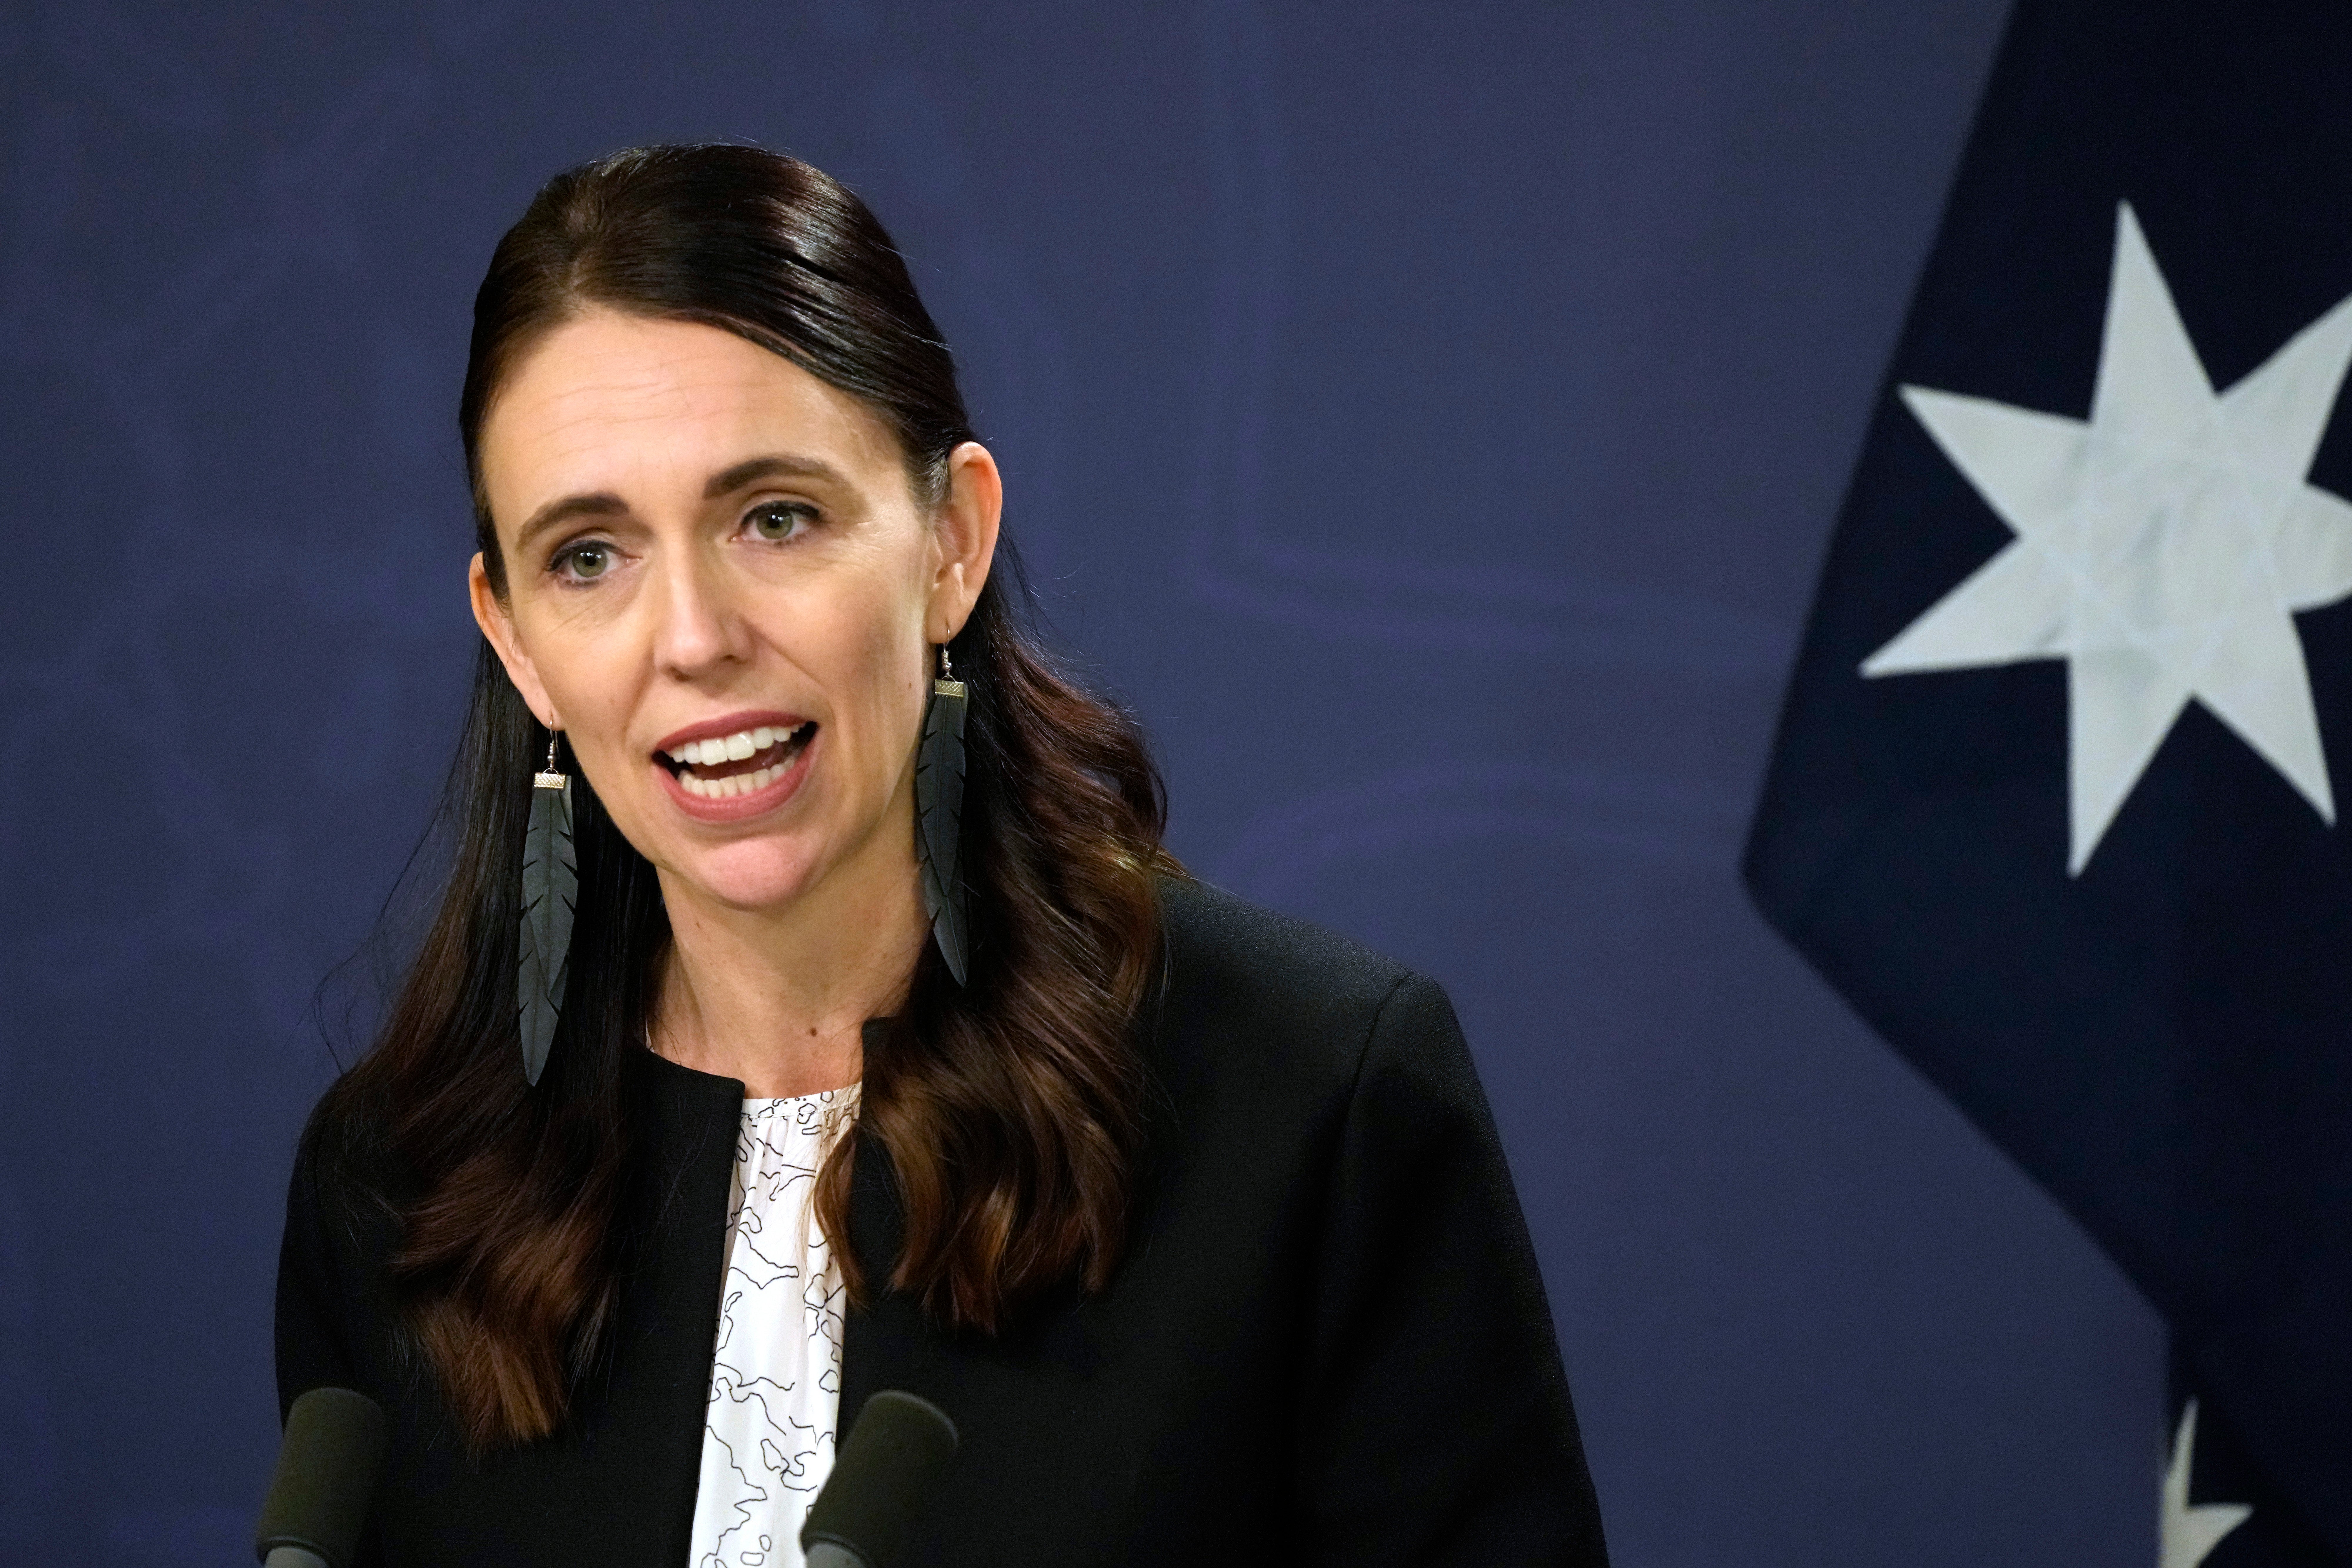 Jacinda Ardern says that the decision was not indicative of a culture war in New Zealand